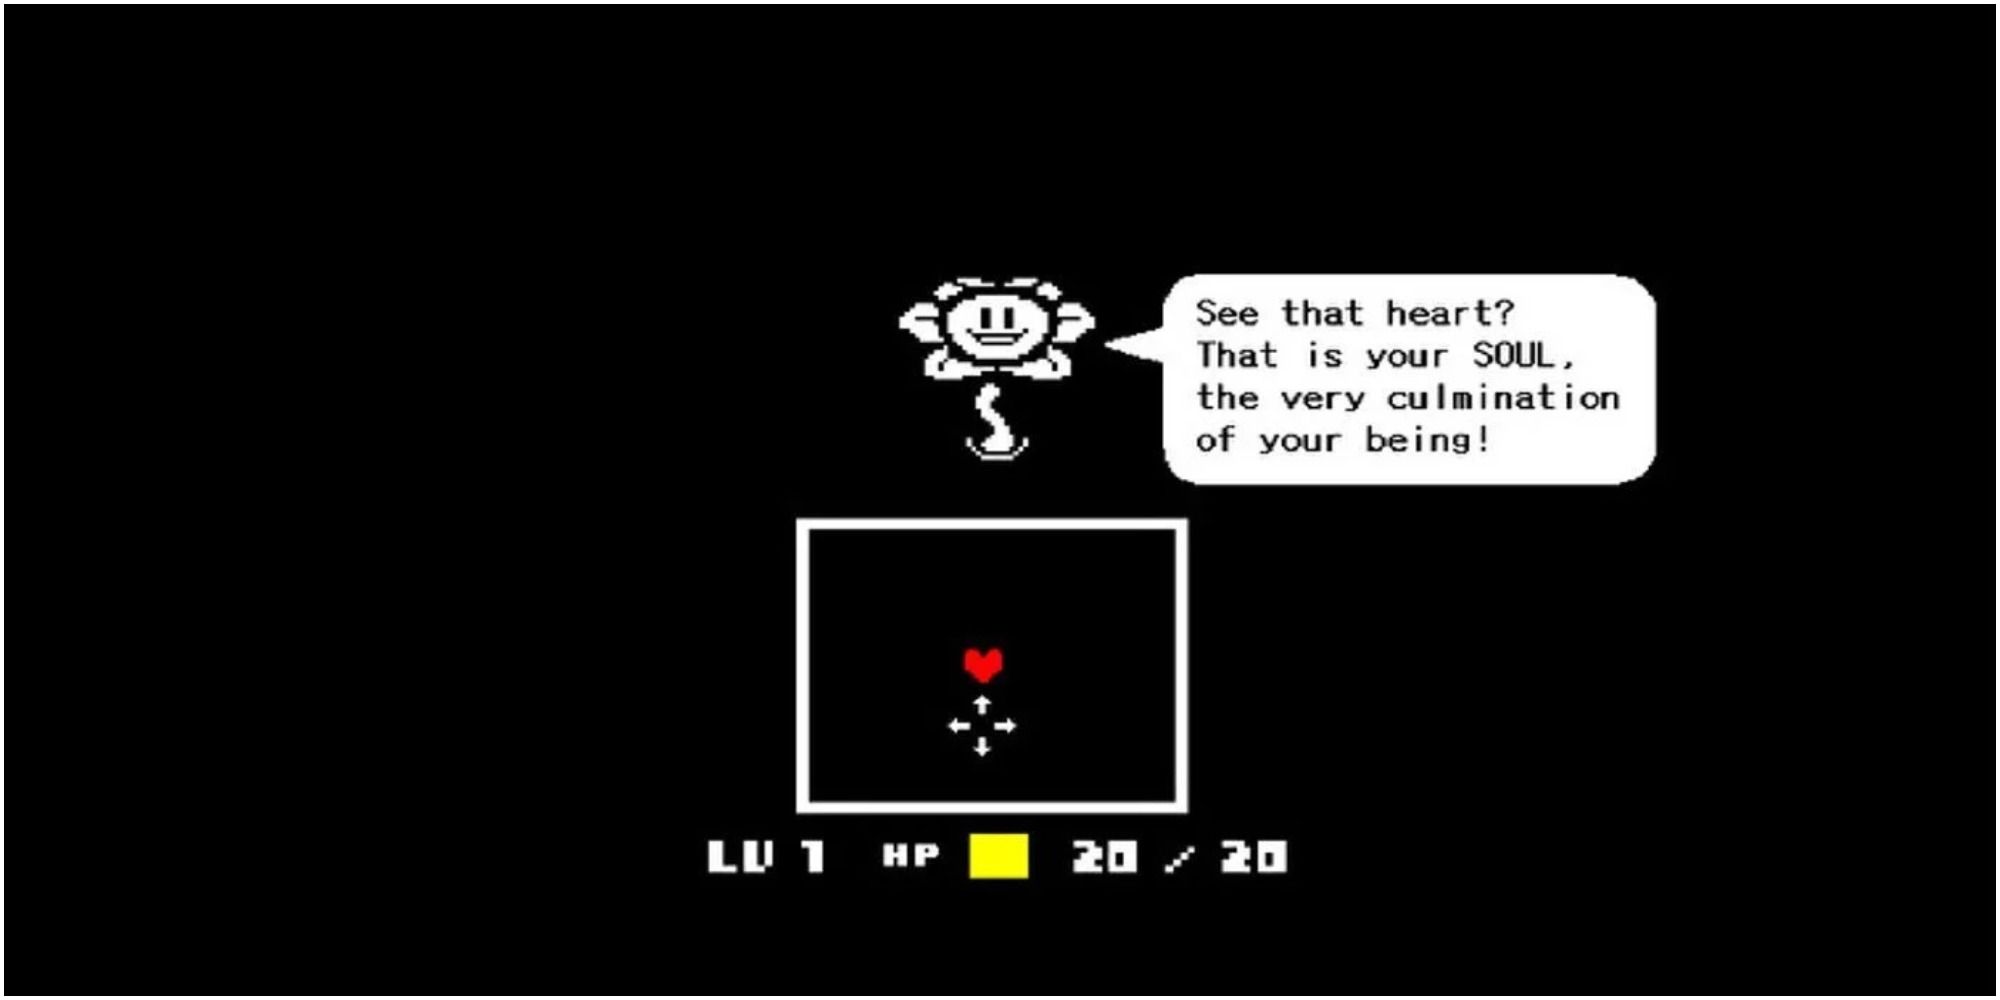 Undertale Flowey provides the guidance on how life works